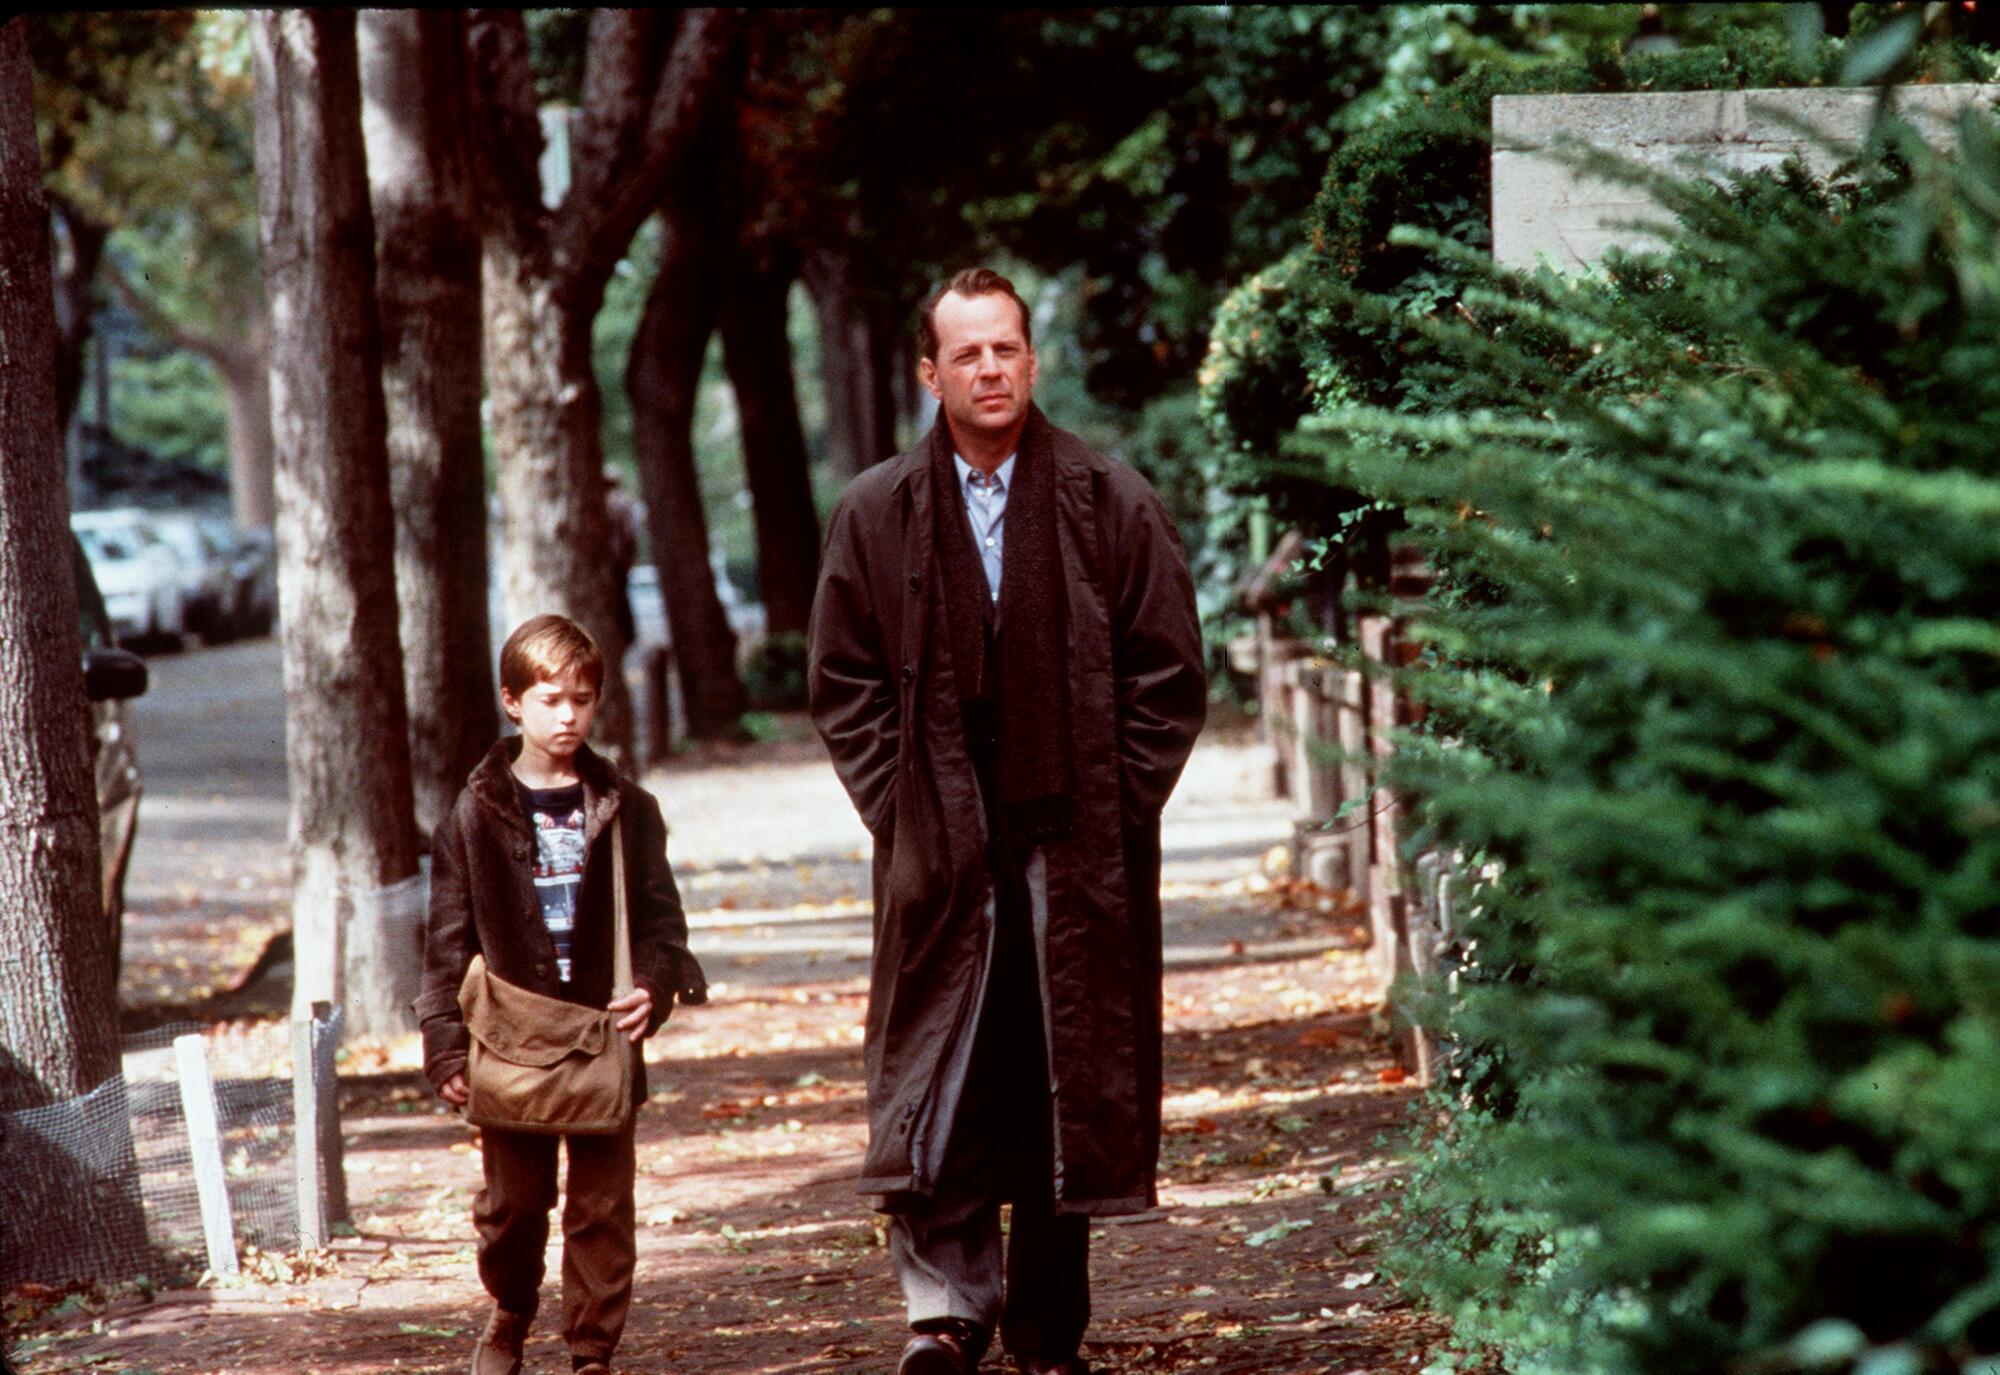 A boy and a man walk side by side on a tree-lined street.